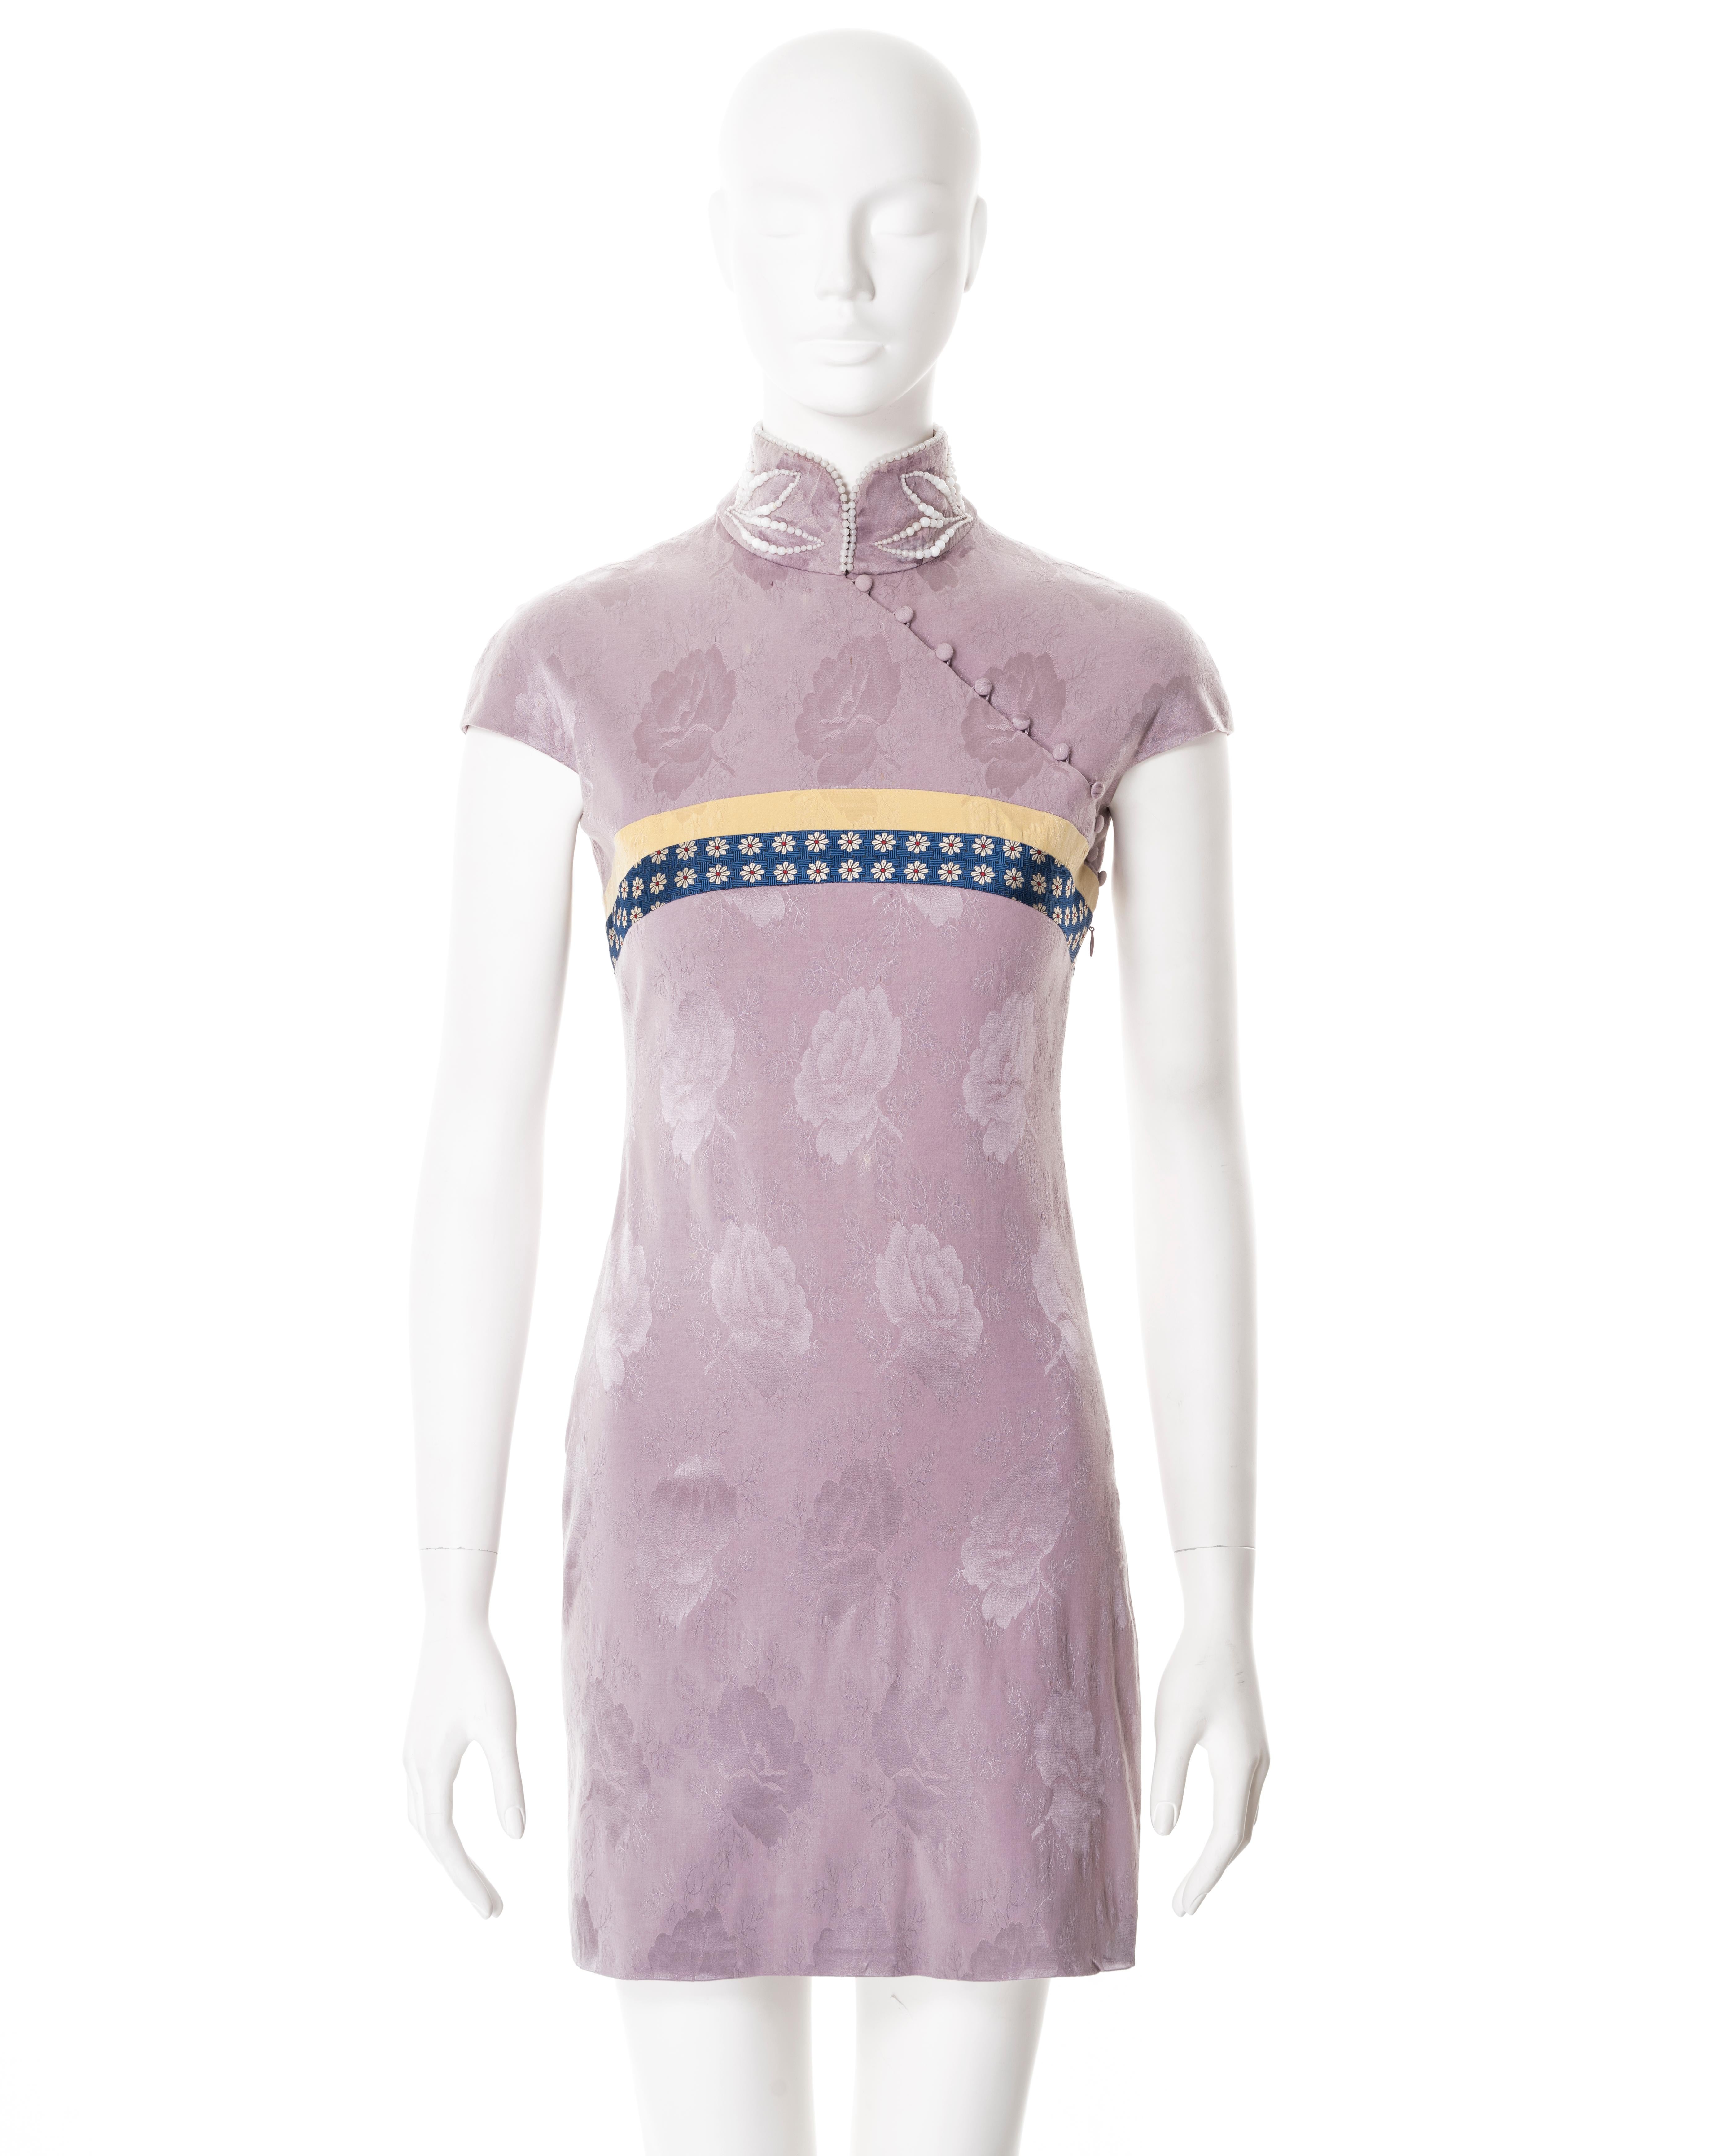 ▪ Christian Dior cheongsam-style mini dress
▪ Creative Director: John Galliano
▪ Sold by One of a Kind Archive
▪ Fall-Winter 1997
▪ Constructed from lilac floral silk damask 
▪ Mandarin collar adorned with faux pearl beads 
▪ Single-sided chest